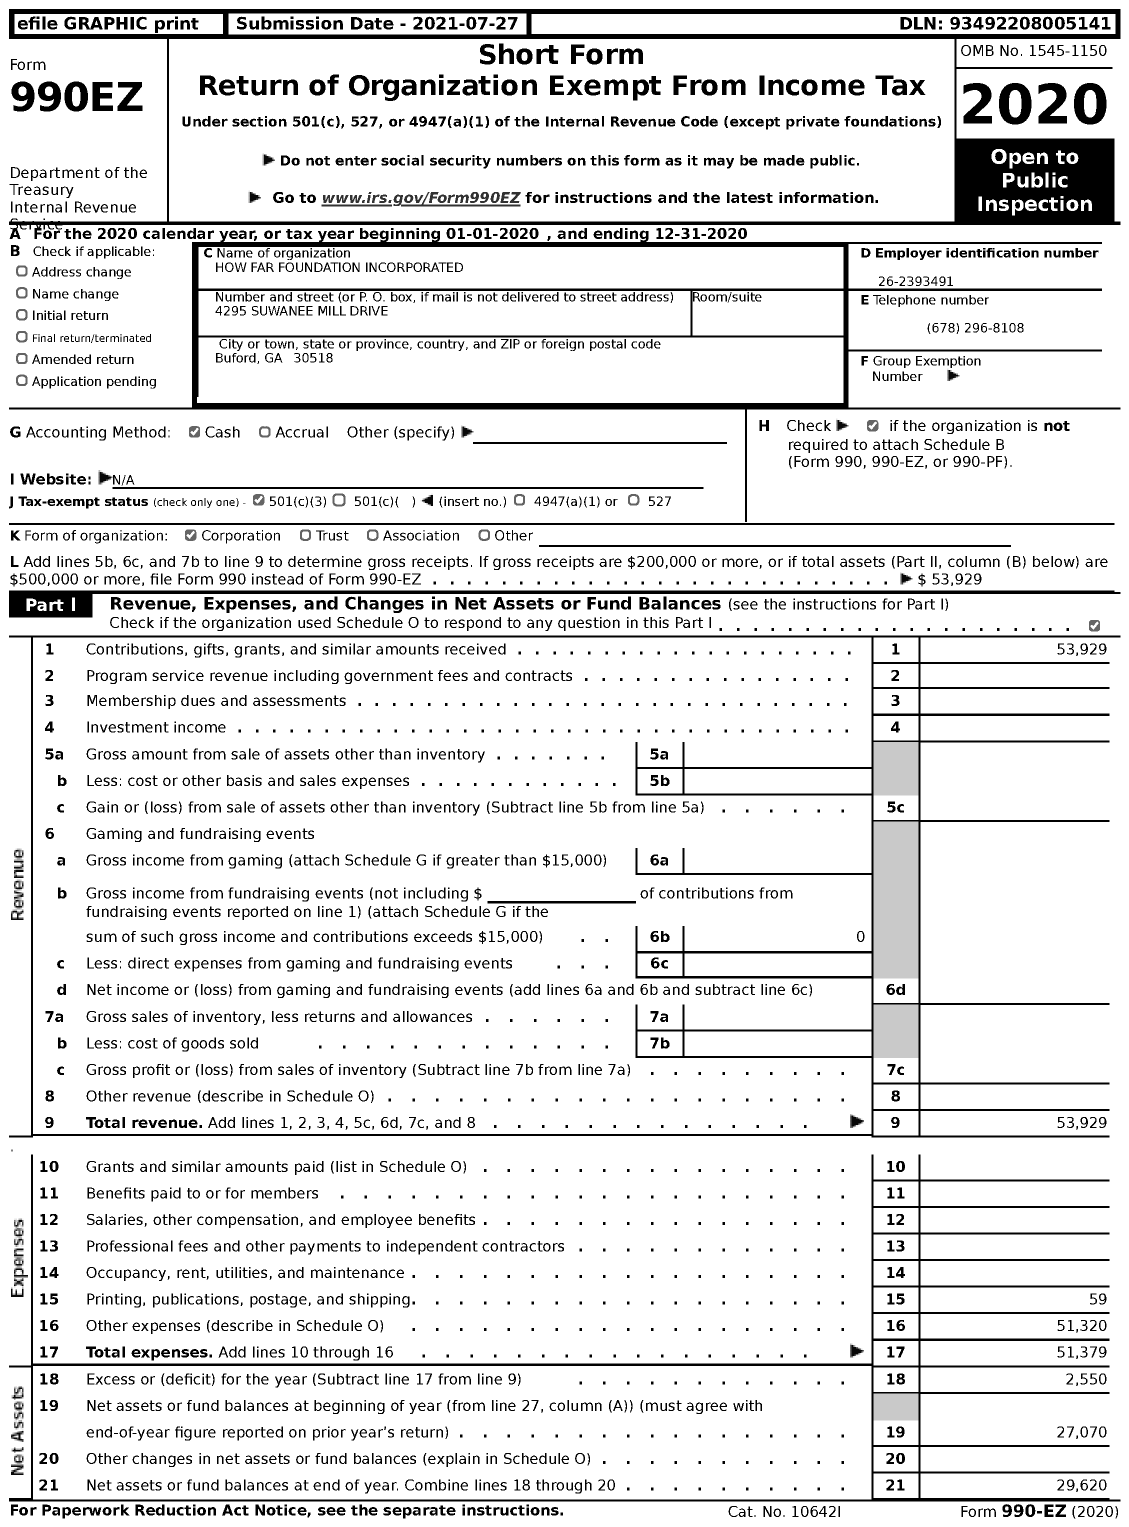 Image of first page of 2020 Form 990EZ for How Far Foundation Incorporated